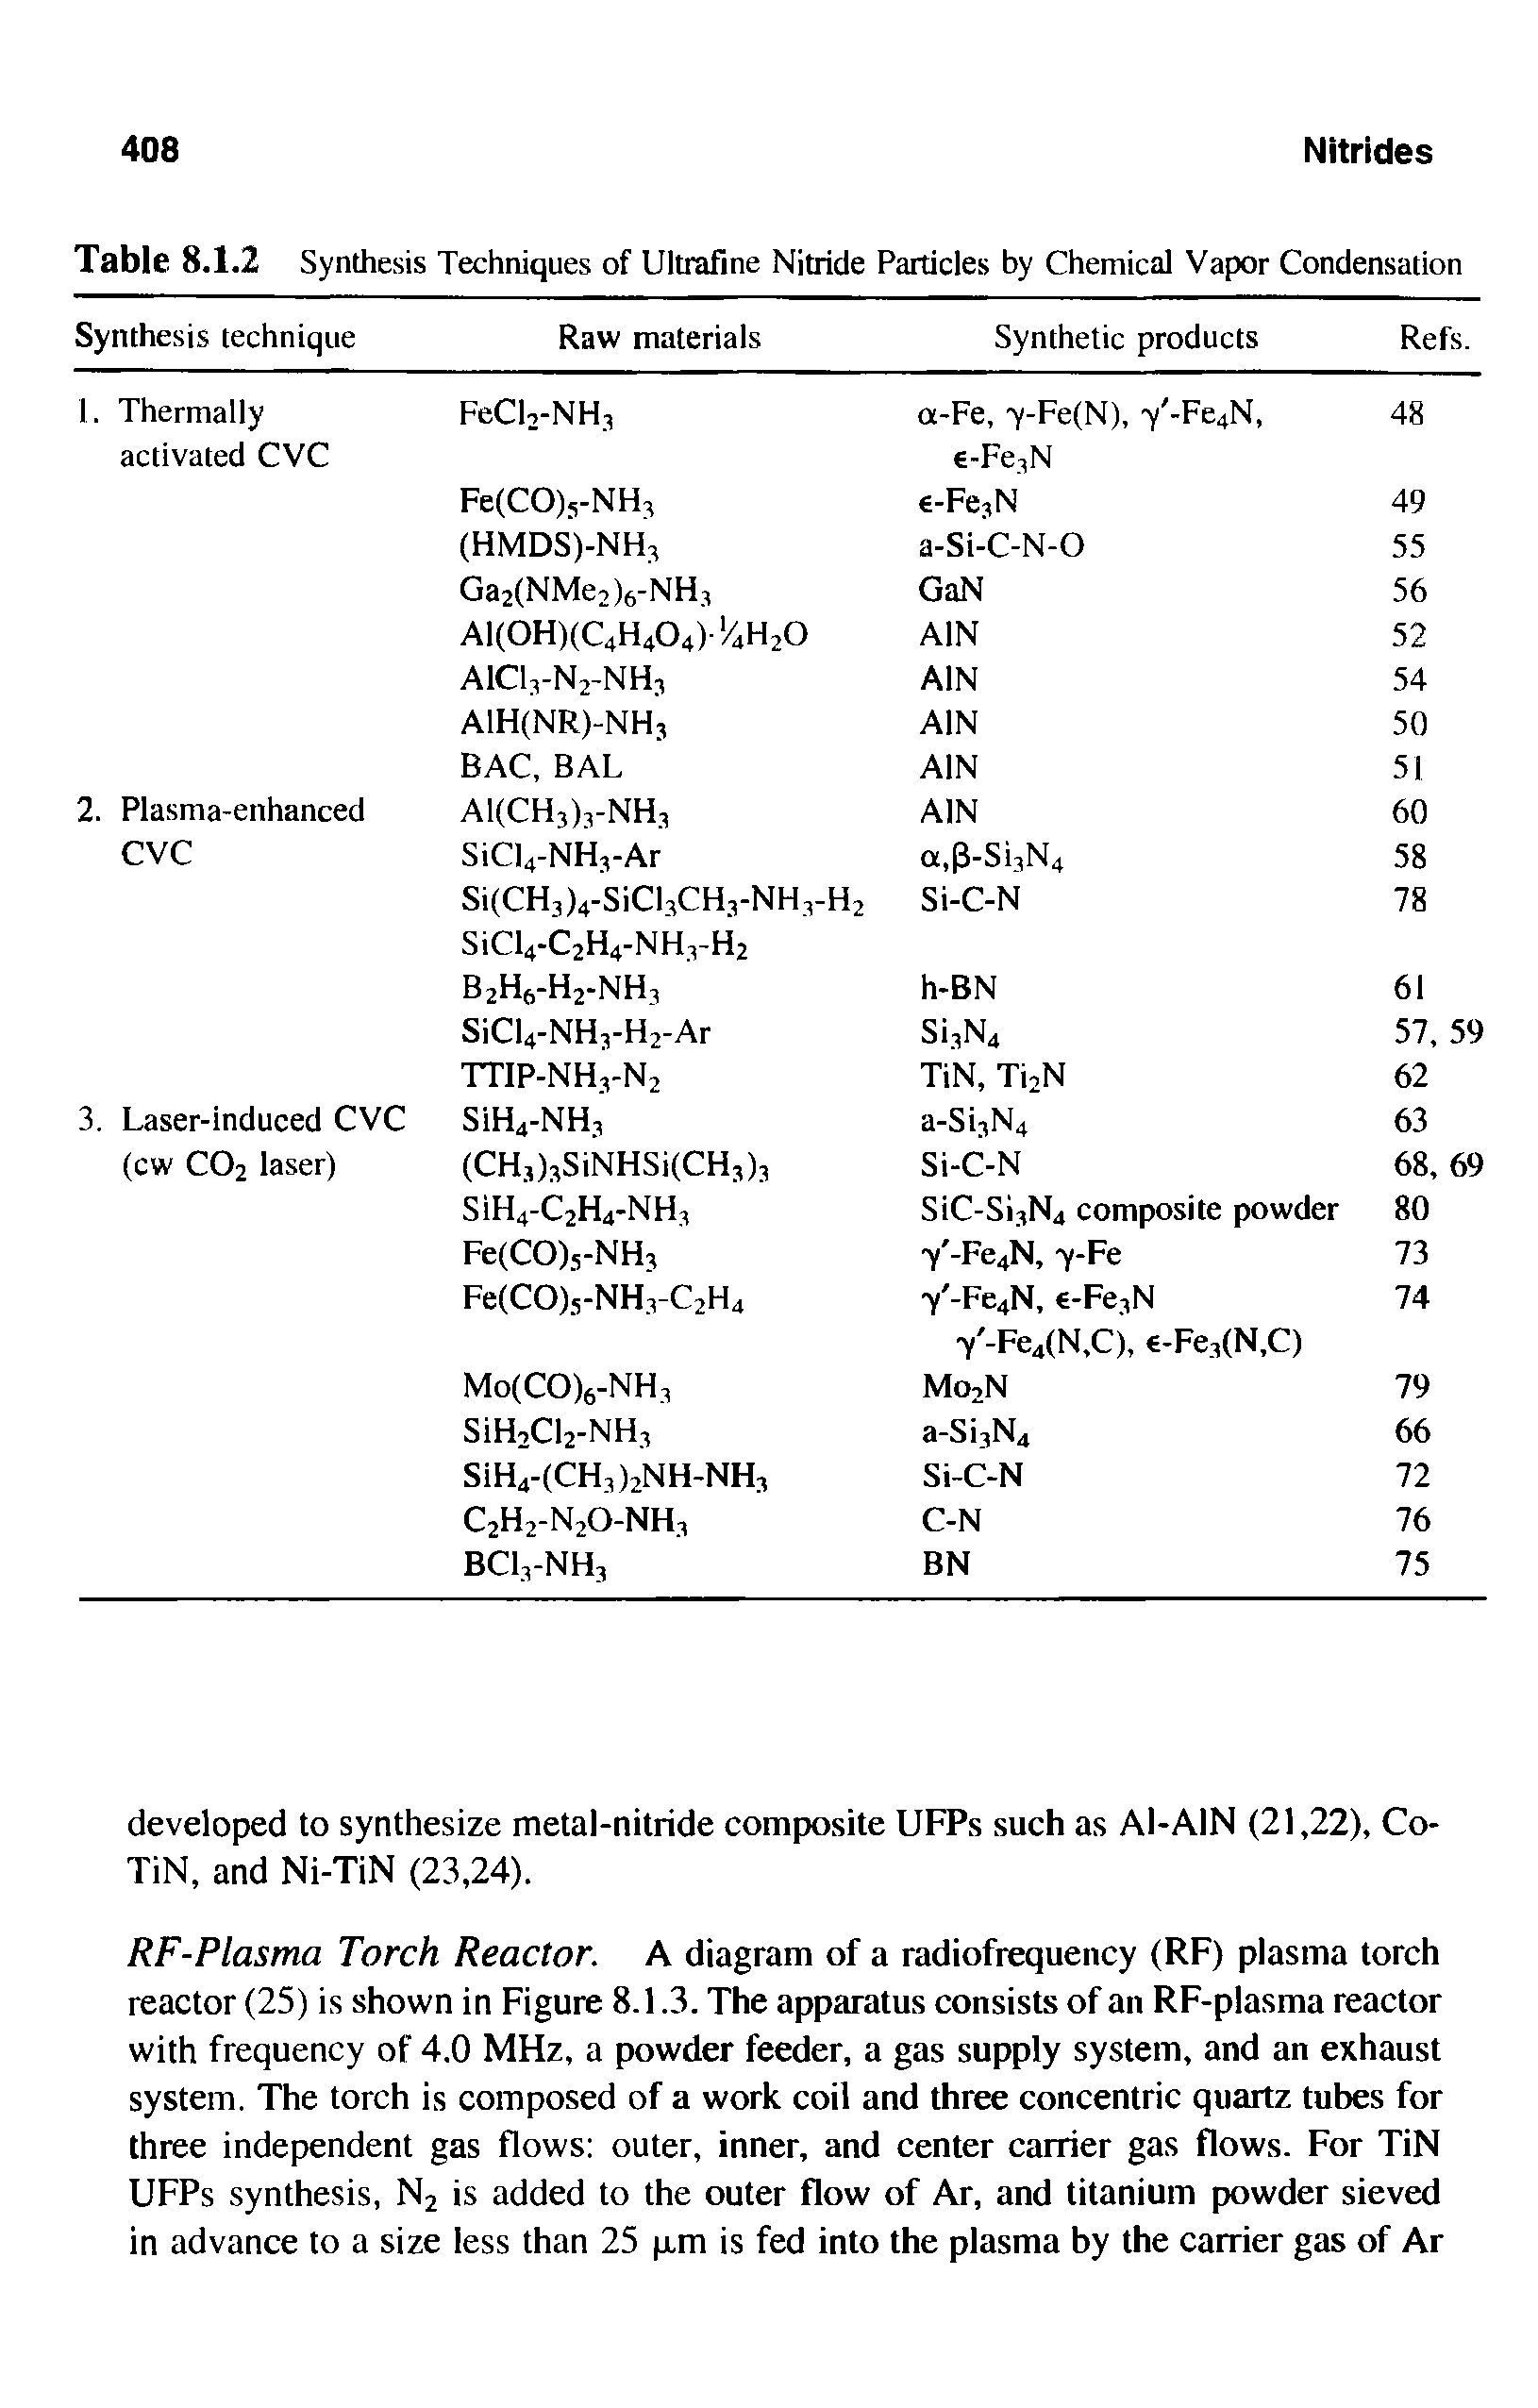 Table 8.1.2 Synthesis Techniques of Ultrafine Nitride Particles by Chemical Vapor Condensation...